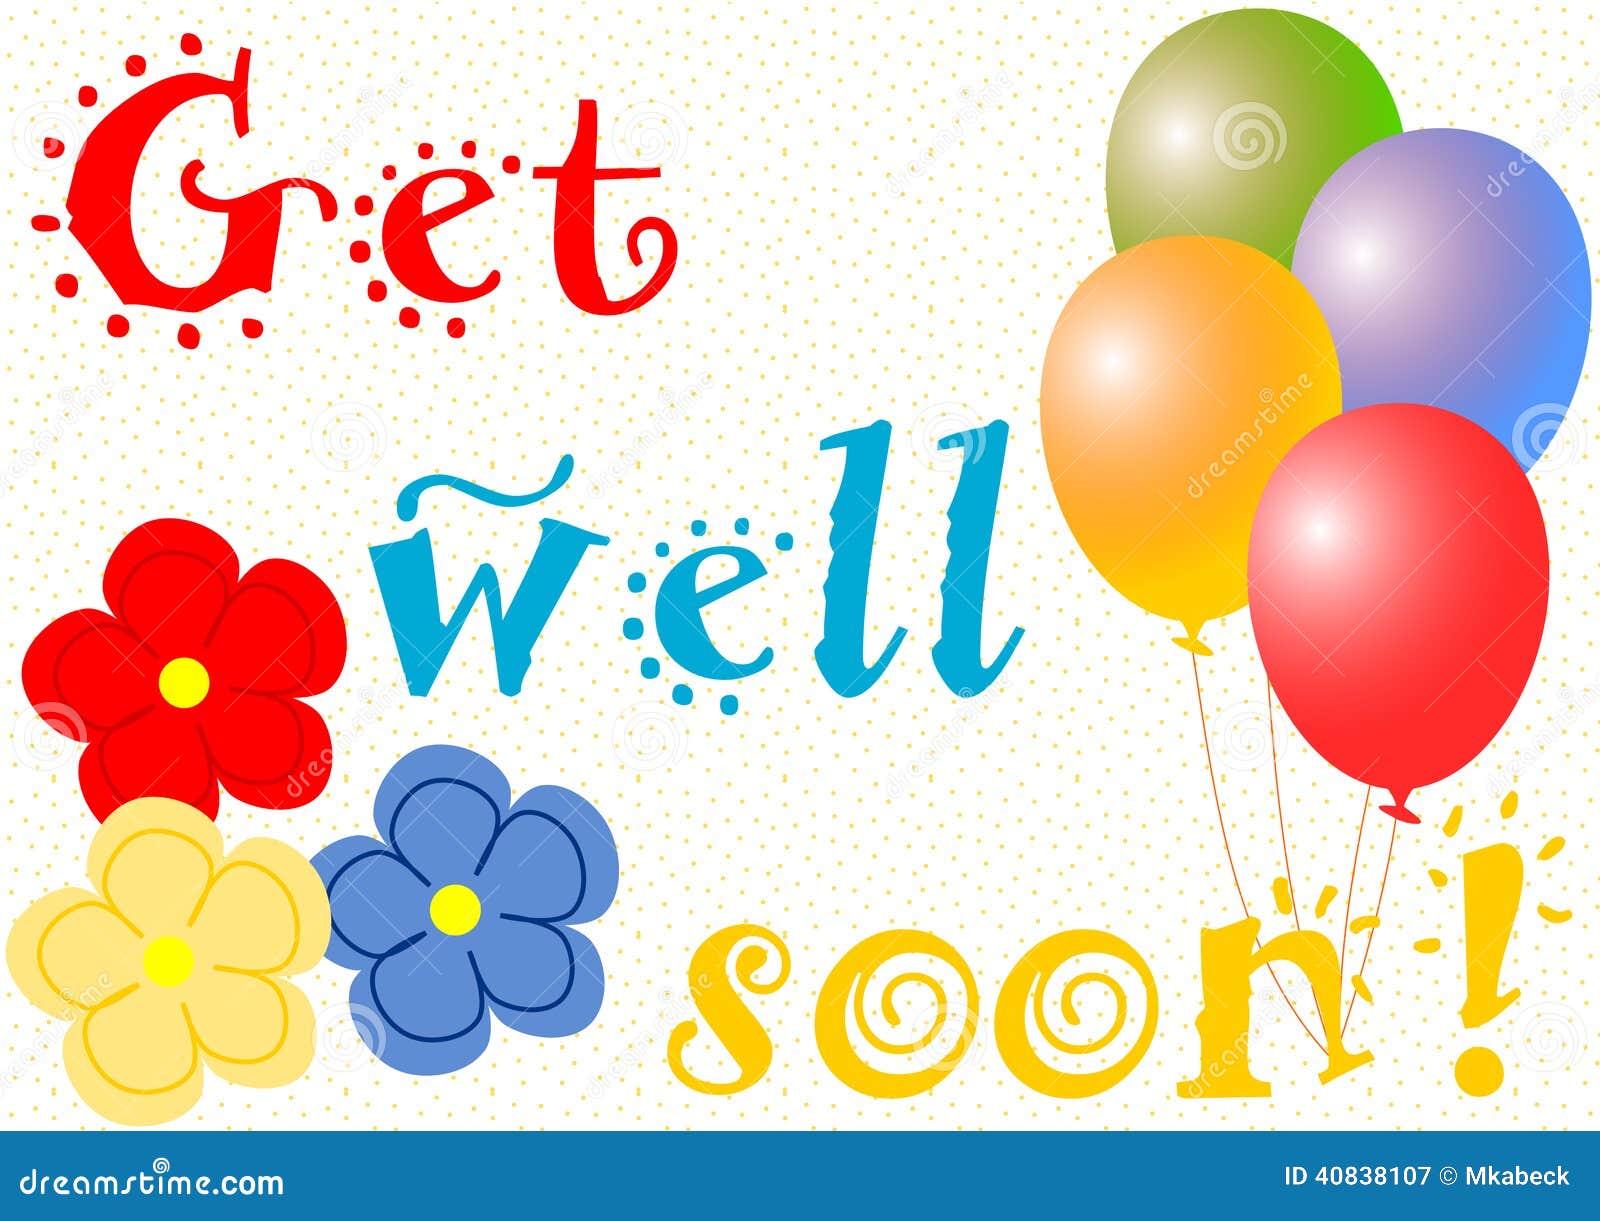 clip art get well wishes - photo #11